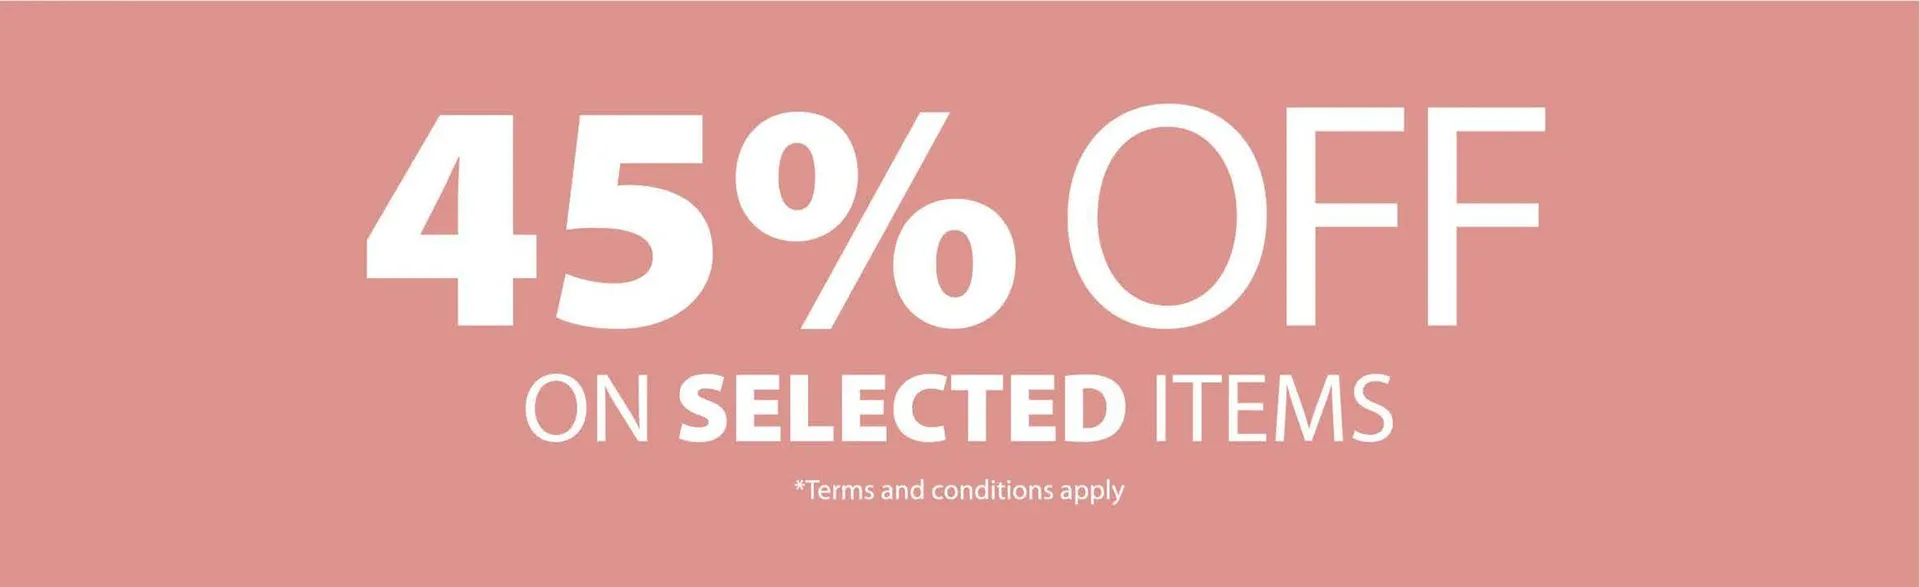 45% Off on Selected Items - 1